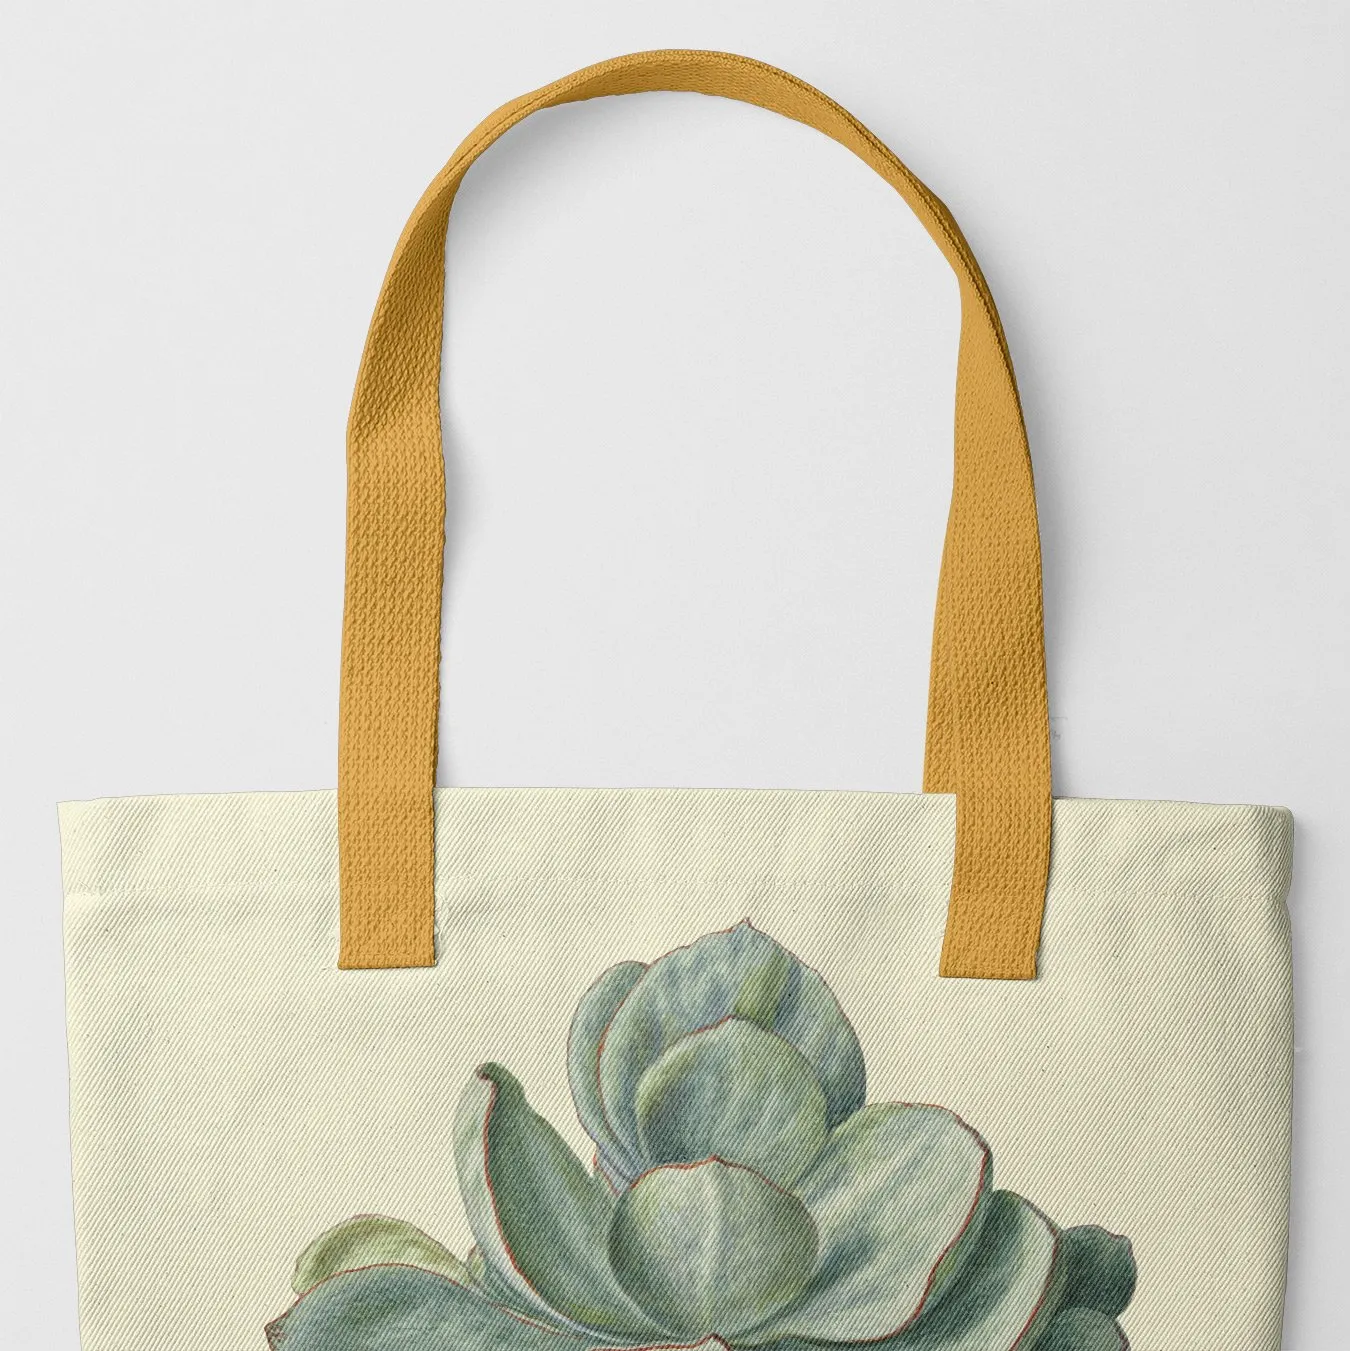 Little Green Man Tote - New Dawn - Heavy Duty Reusable Grocery Bag - Yellow Handles - Shopping Totes - Aesthetic Art